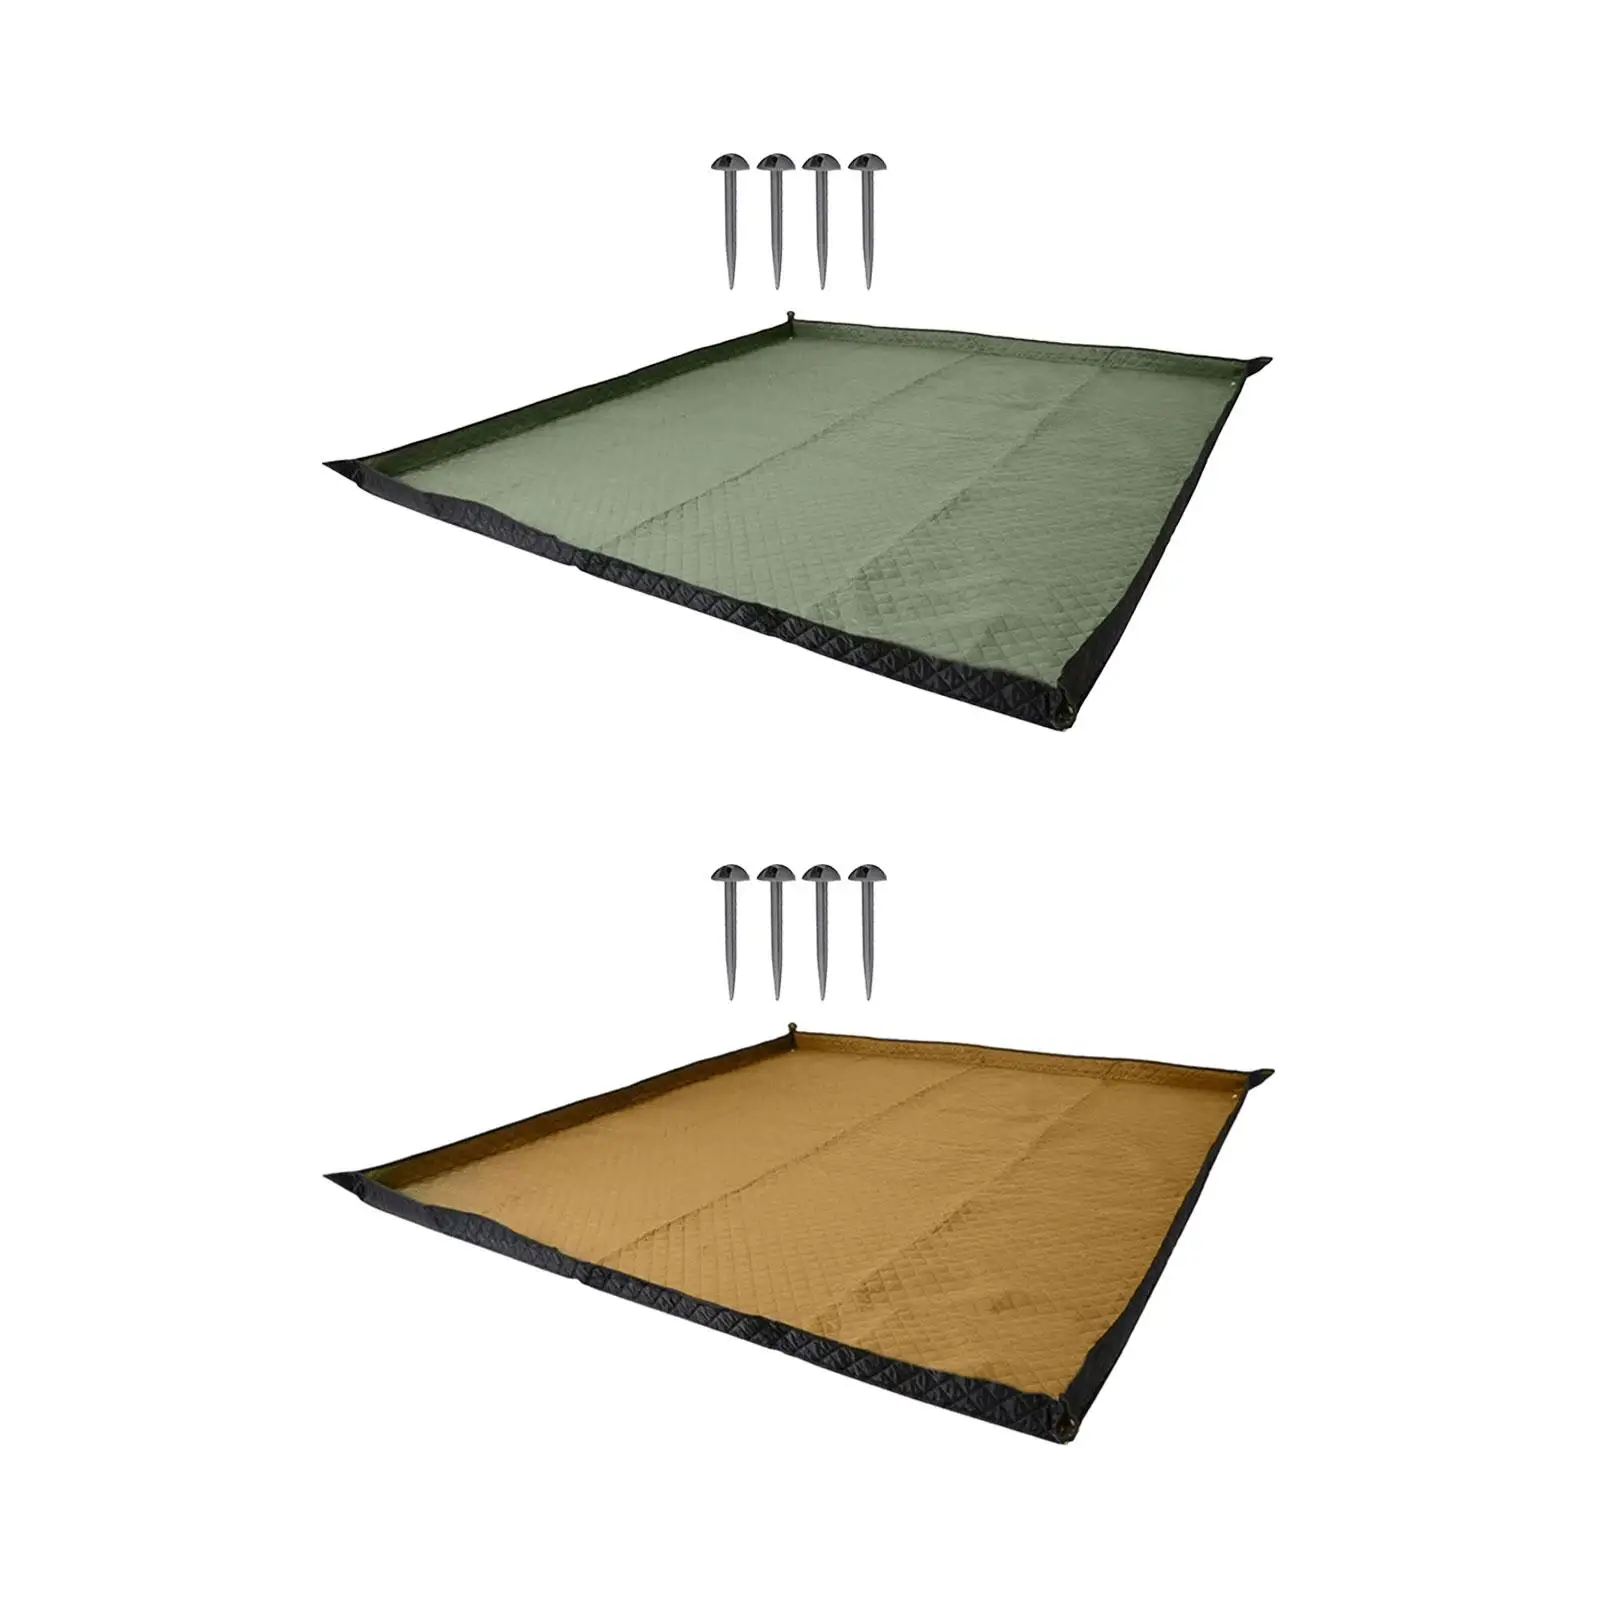 Sleeping Pad Park Blanket Folding 78.7inchx78.7inch Wear Resistant Rug Beach Mat Tent Pad for Camping Party Family Travel Hiking